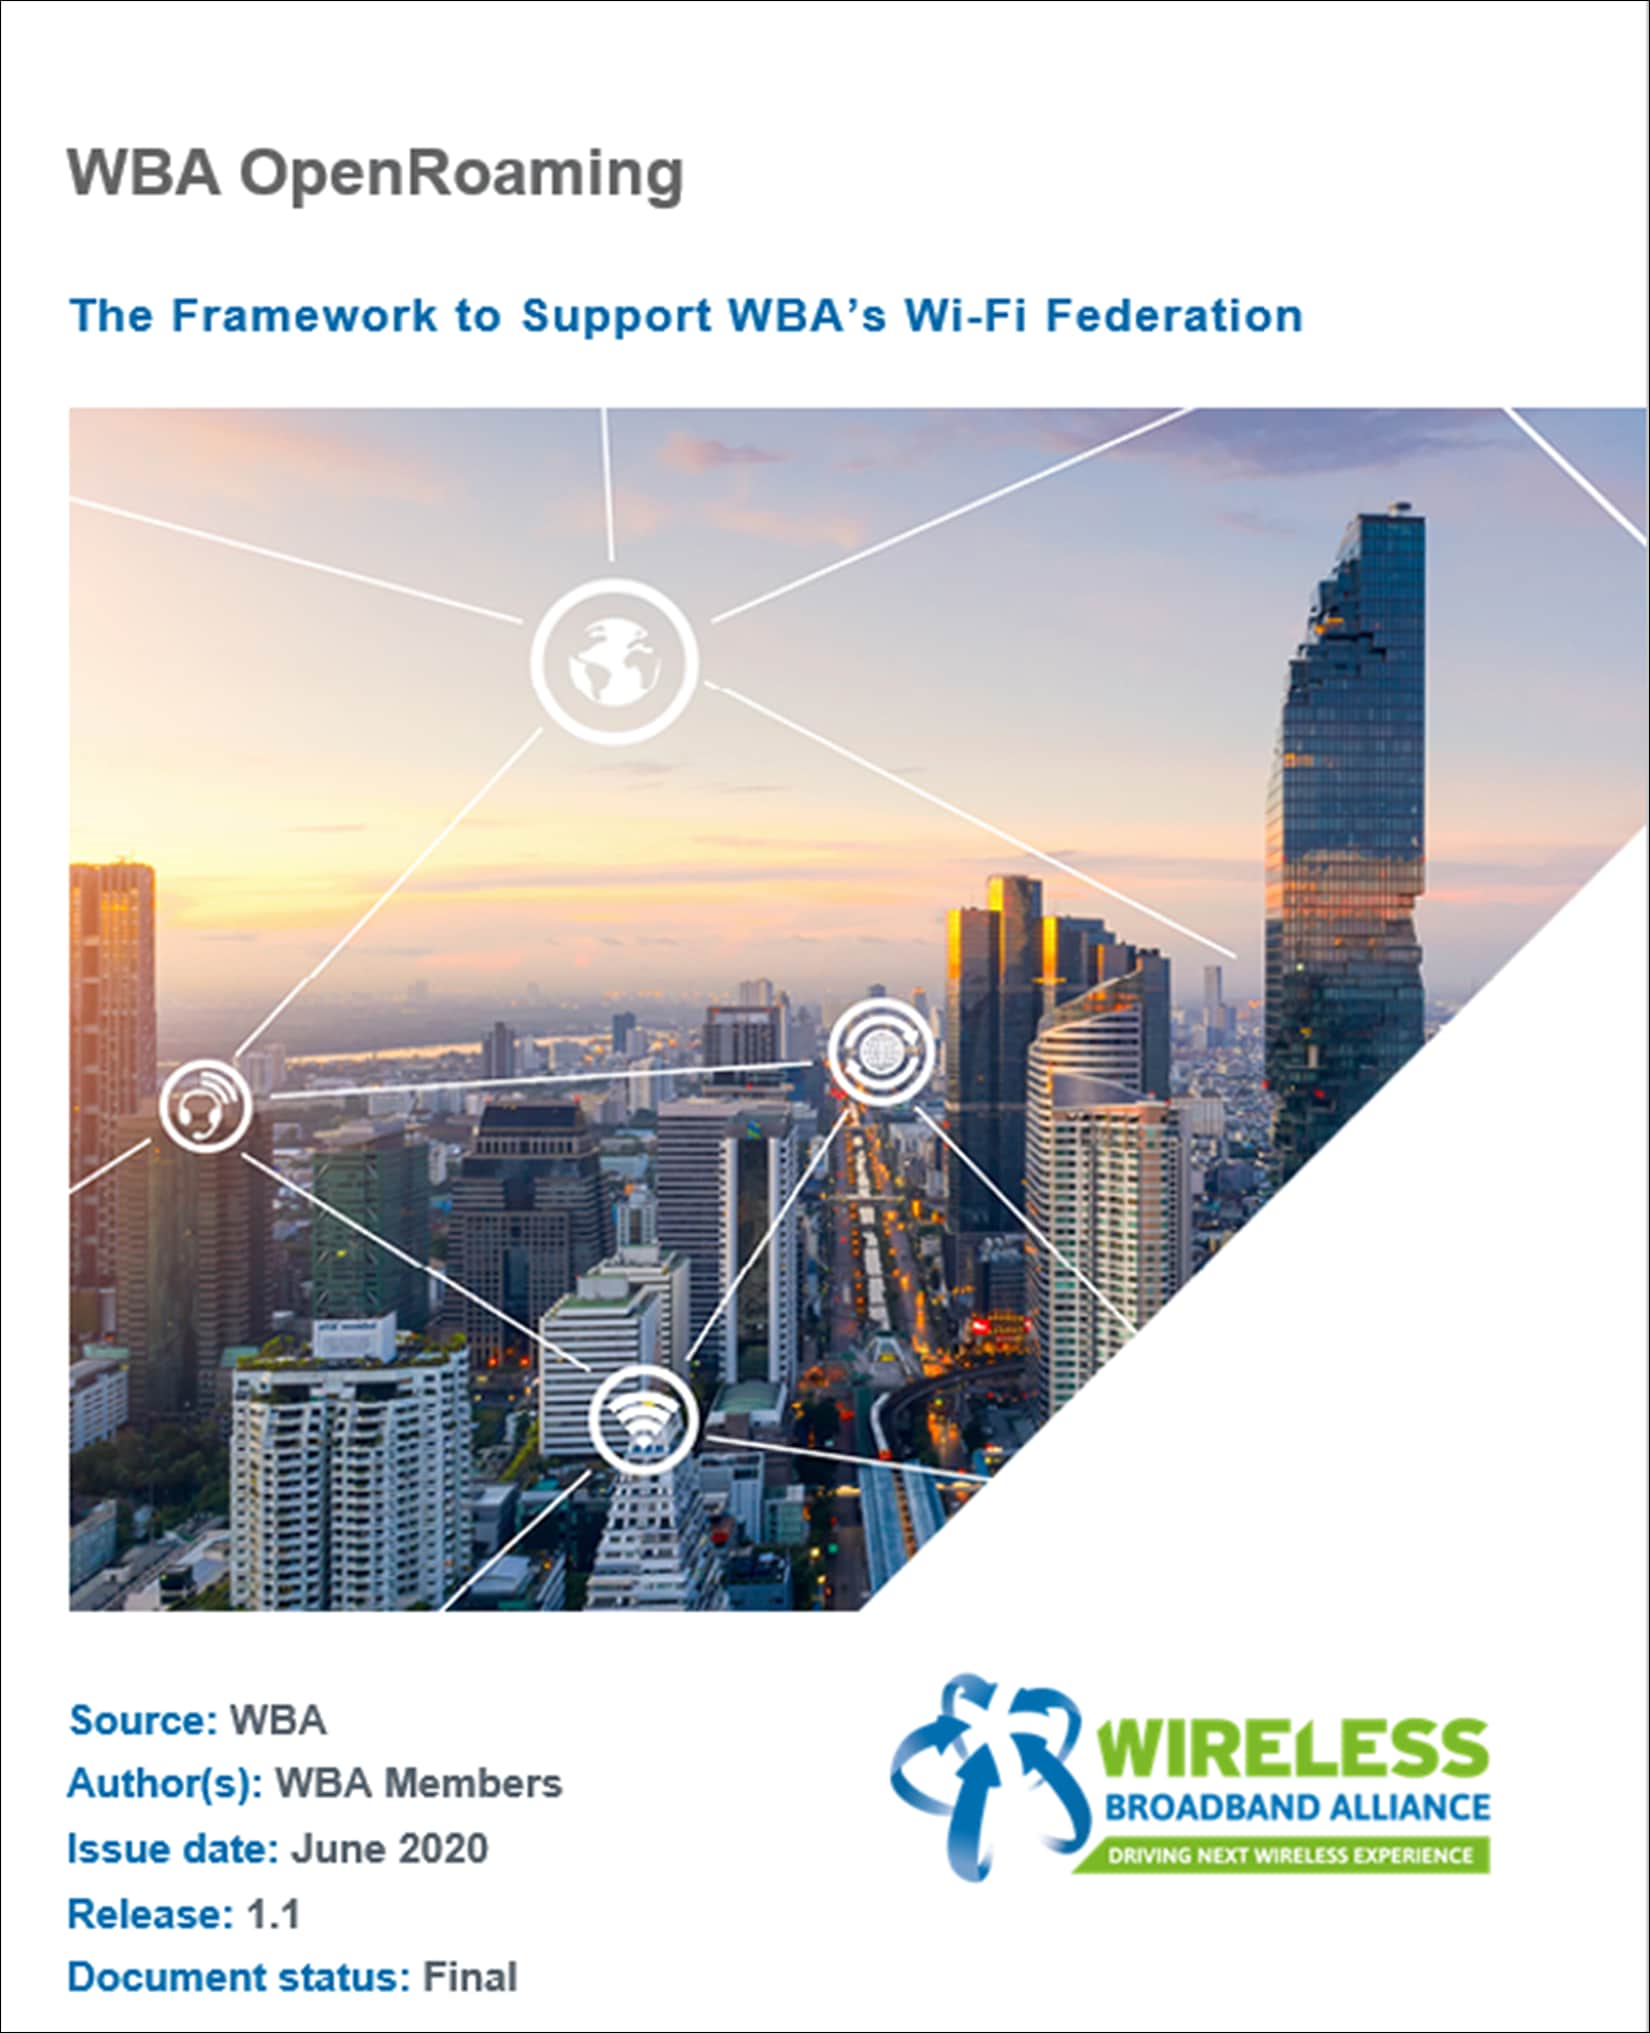 Wi-Fi 6 access point gateways enable BLE end devices such as BLE beacons and asset tags